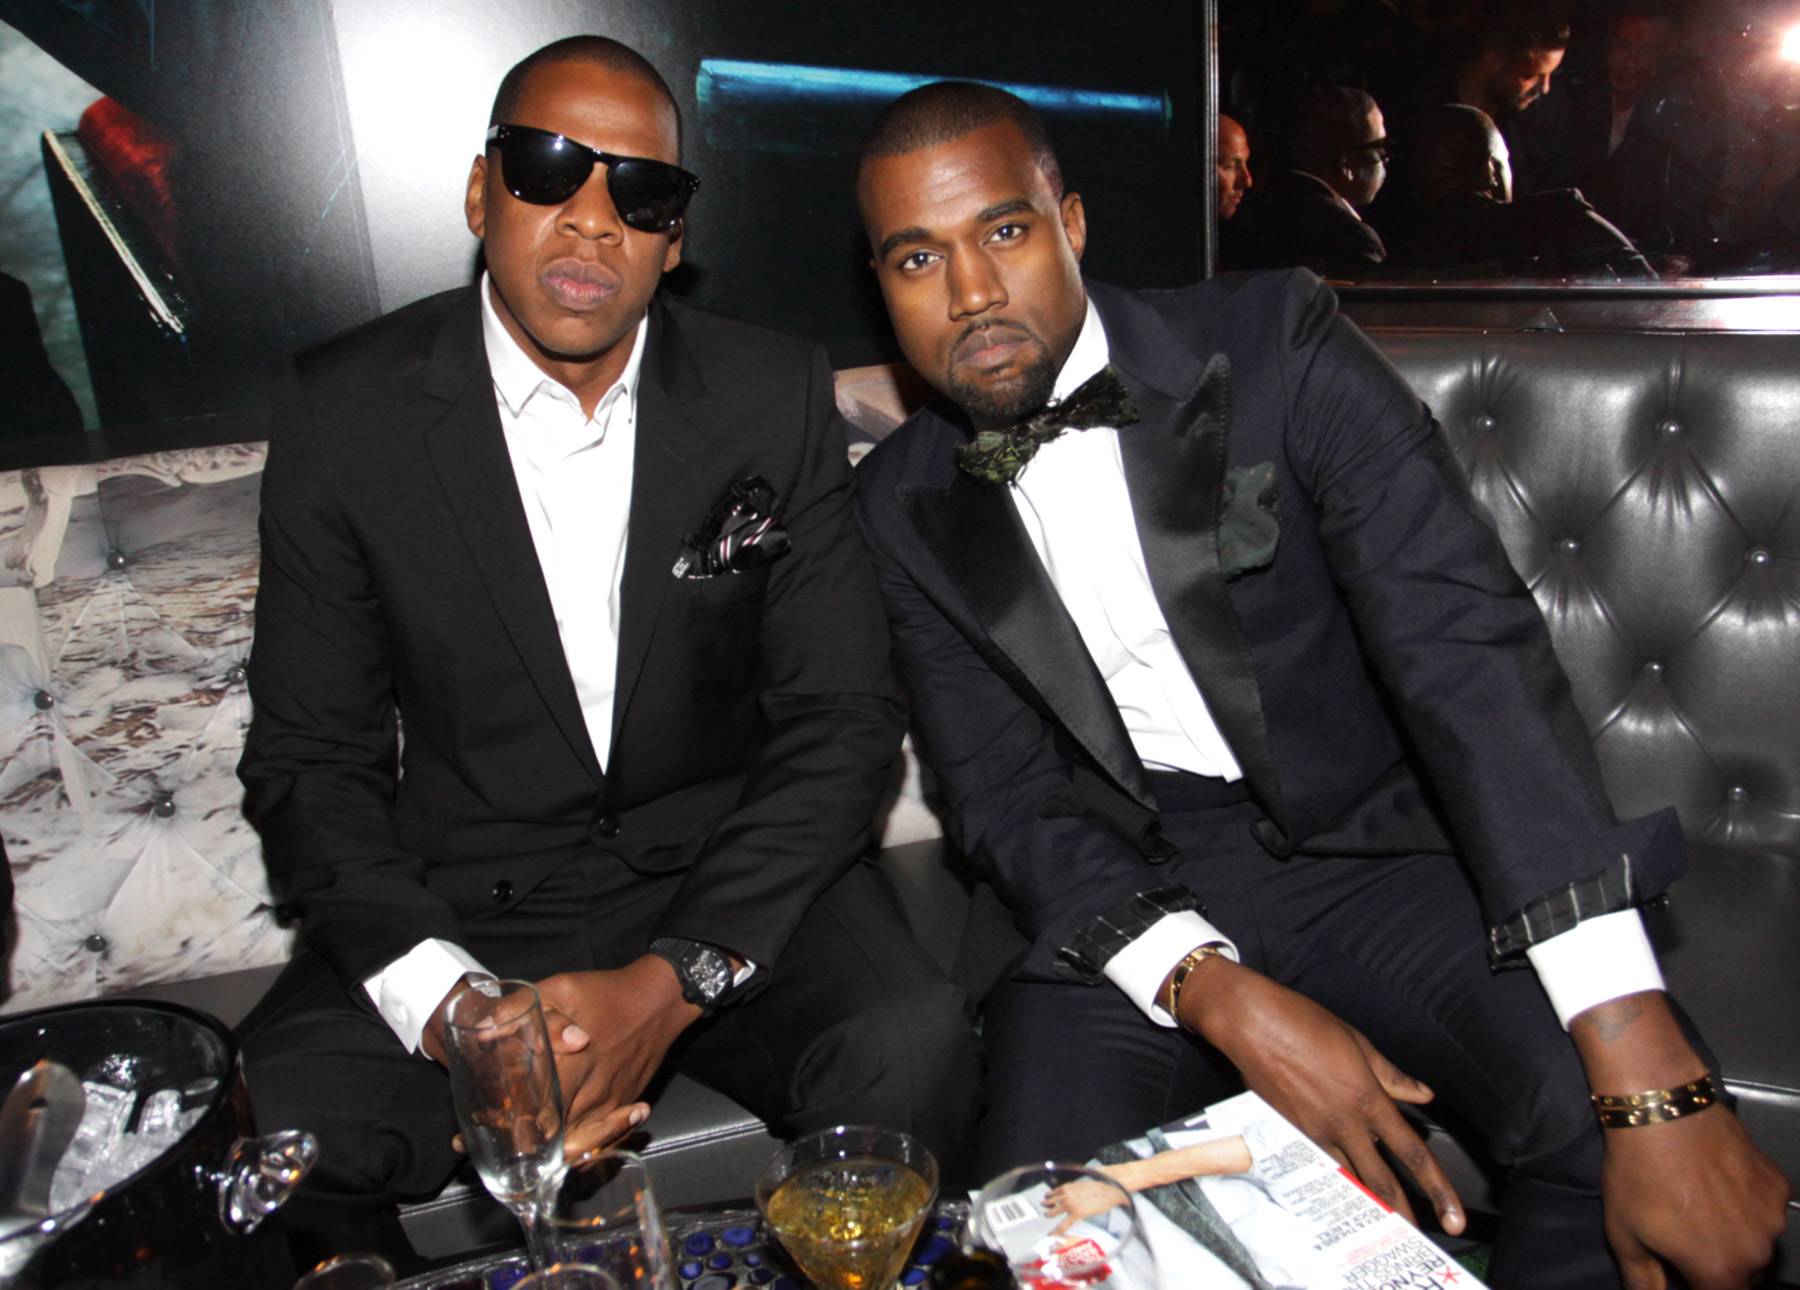 The Empire Keeps Growing - Kanye West and Jay Z have joined forces again as DONDA has entered a partnership with Roc Nation. It's best to keep business in the gamily sometimes and that's exactly what these two are doing. Congrats, guys! (Photo: Johnny Nunez/Getty Images)